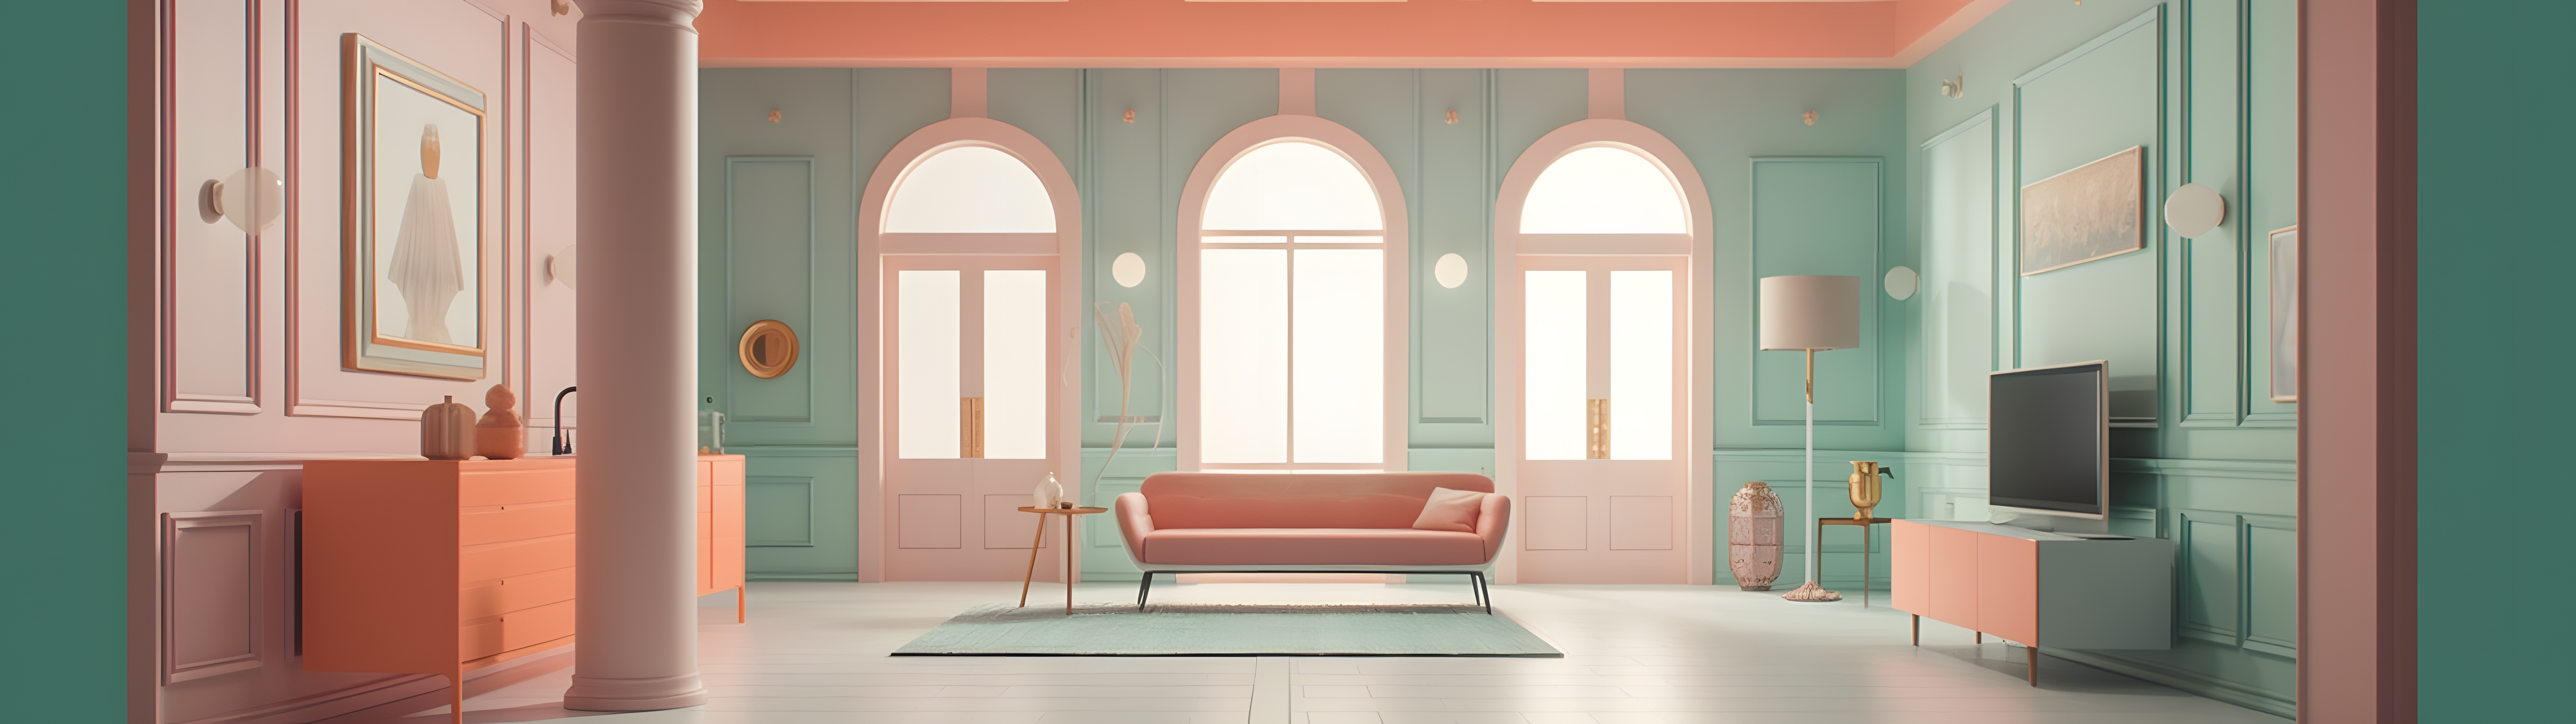 General 5120x1440 AI art minimalism interior design pastel Wes Anderson simple background couch